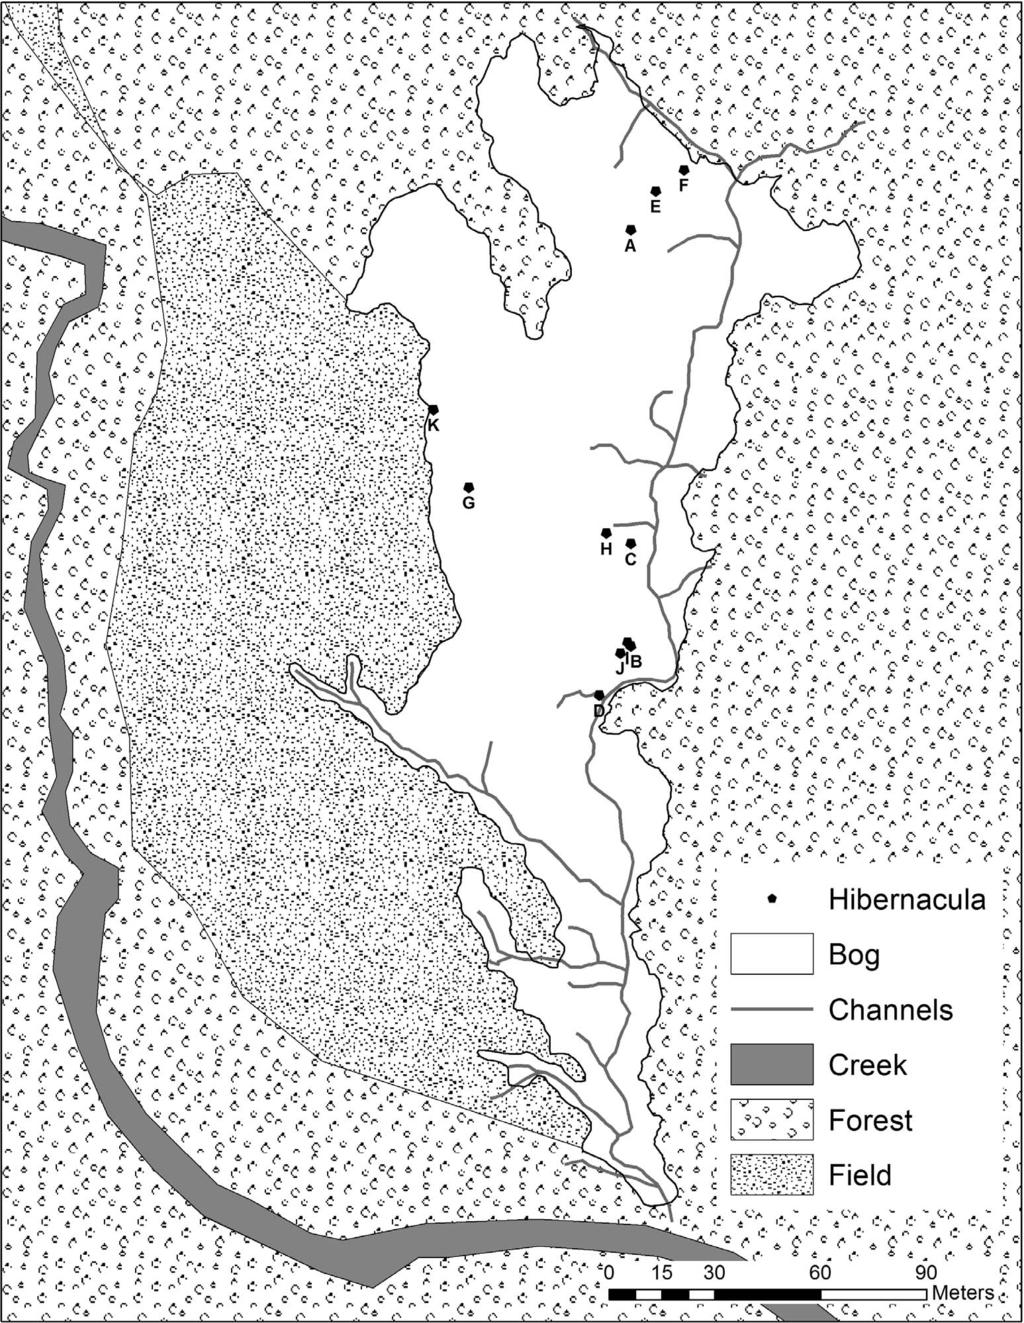 476 Copeia 104, No. 2, 2016 Fig. 1. Location of Bog Turtle (Glyptemys muhlenbergii) hibernacula (A K) in the southern Appalachians, from the winter of 2005 to the winter of 2013.